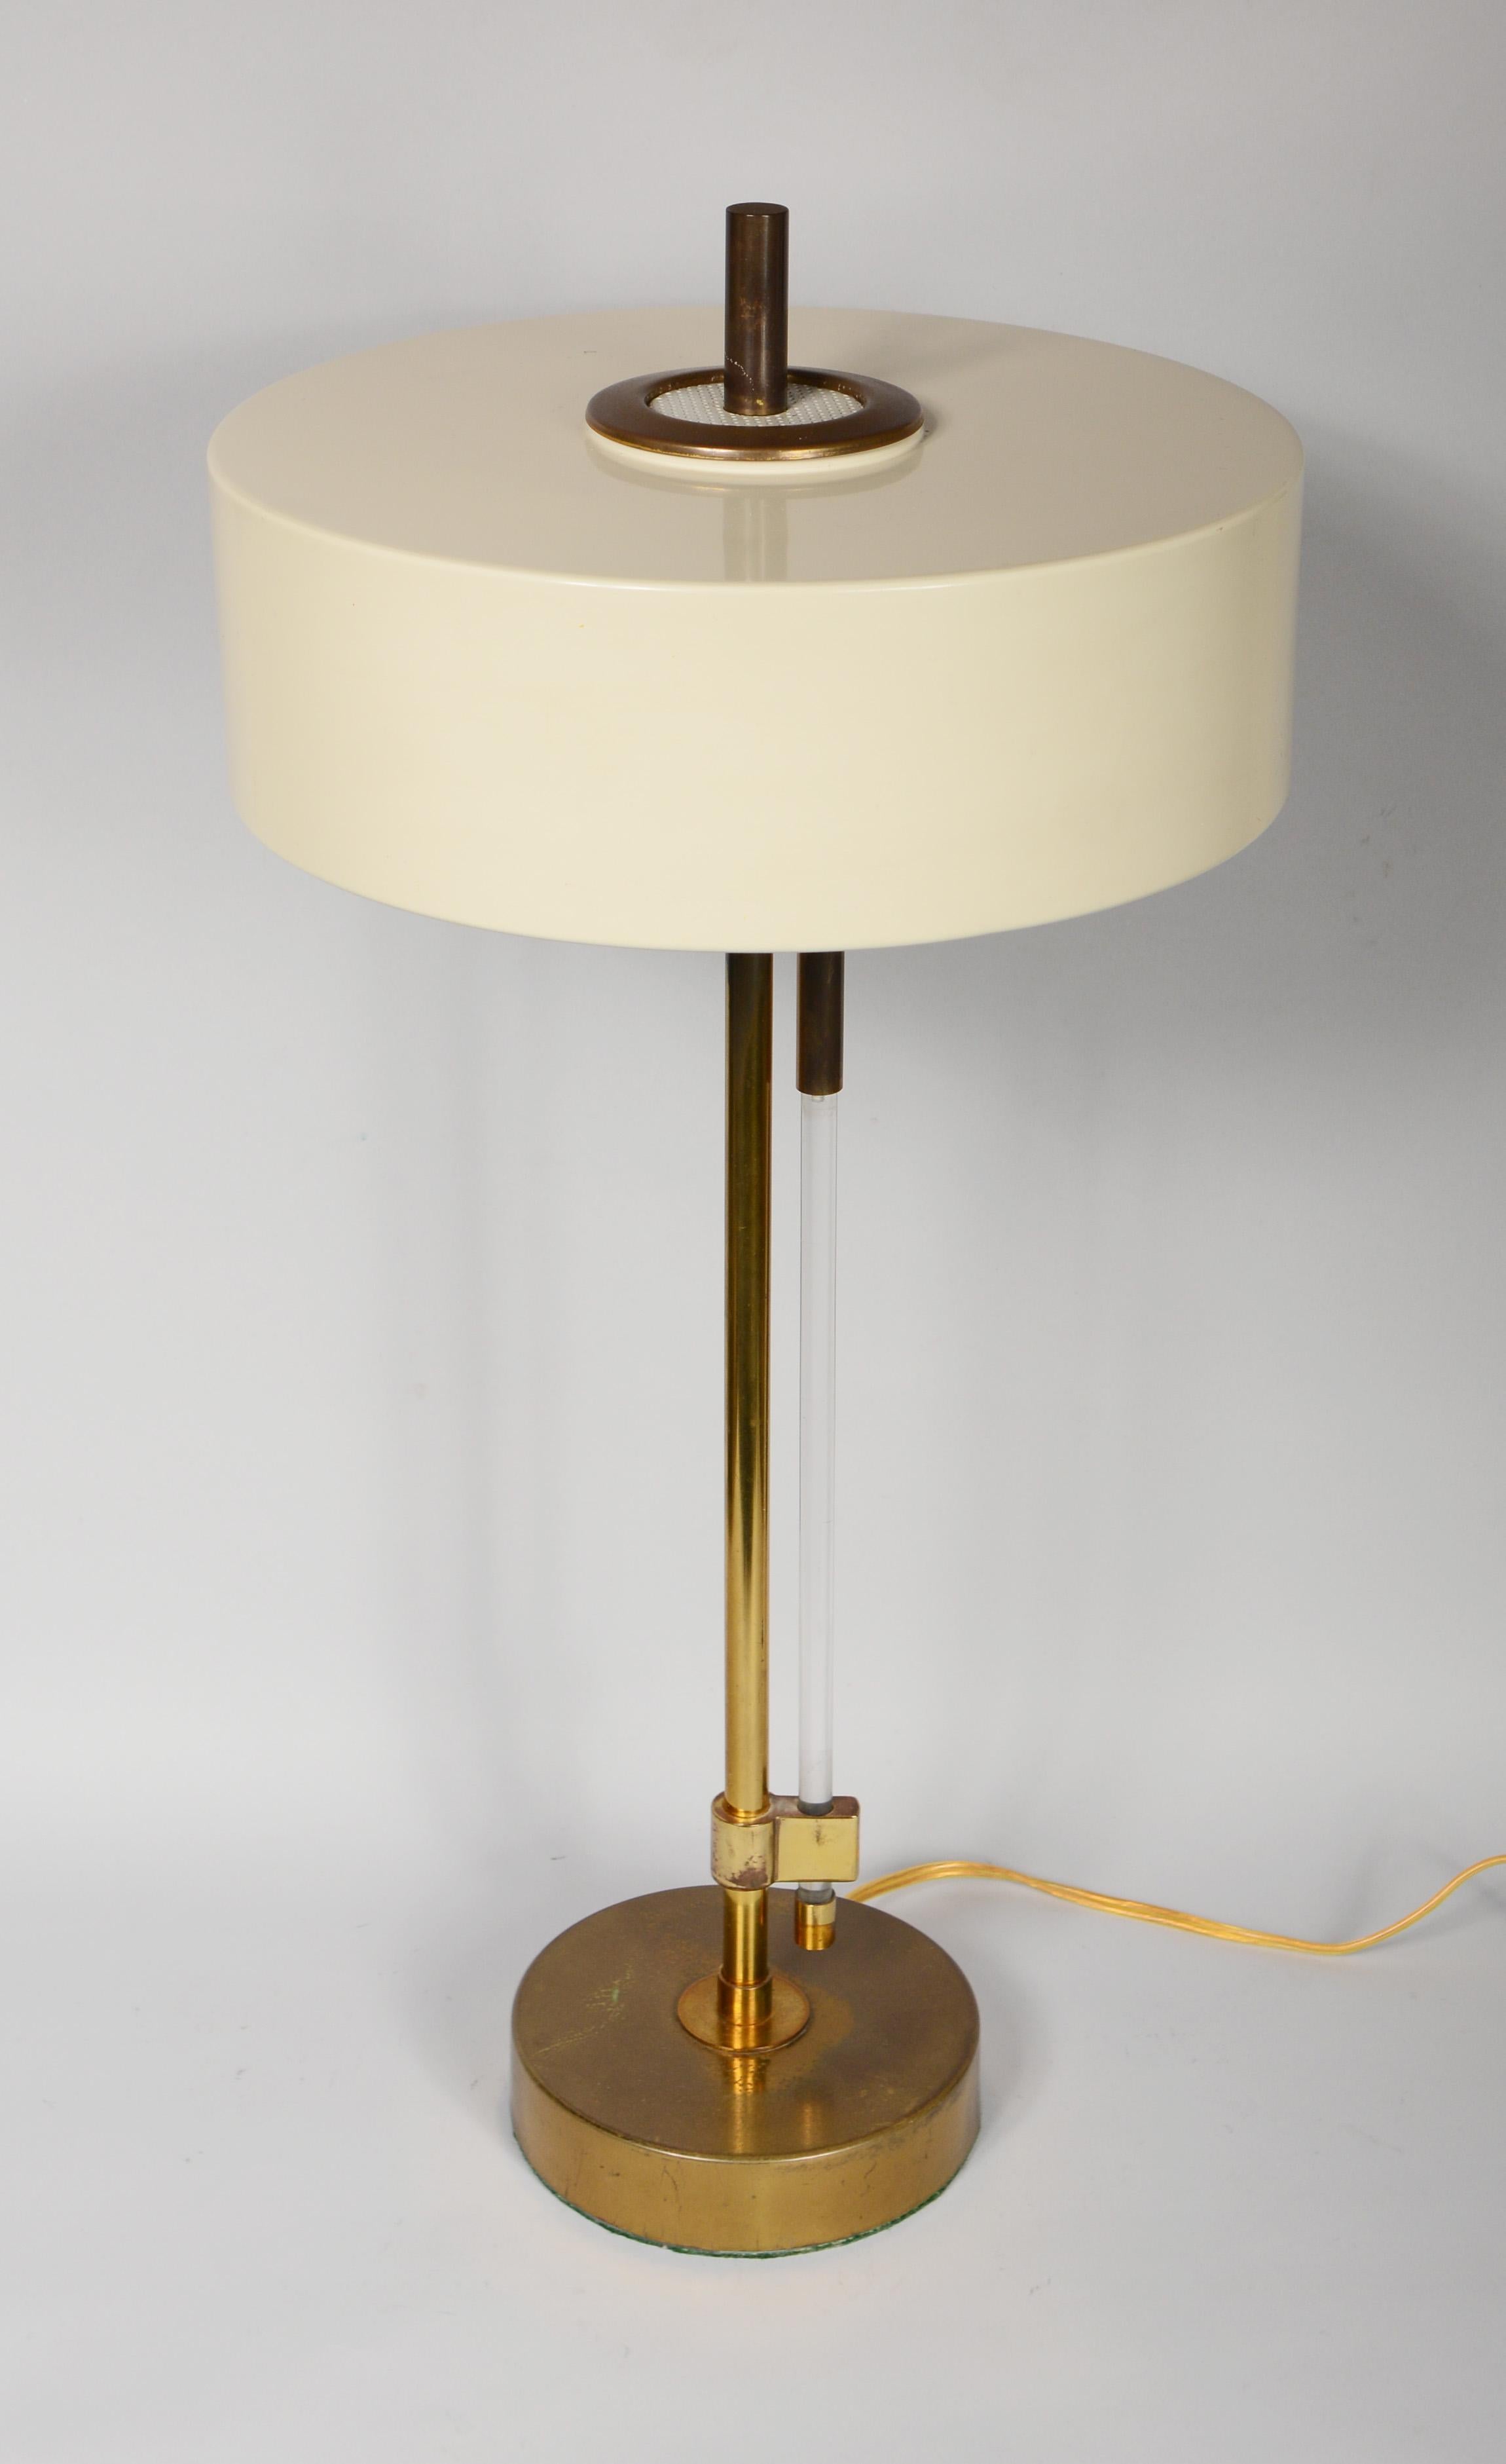 Desk or table lamp by the Mutual Sunset Lamp Company. The switch on this lamp is operated by pulling the acrylic rod down that runs along the brass column. There is a three way switch lighting one bulb, two bulbs and then all three bulbs. The